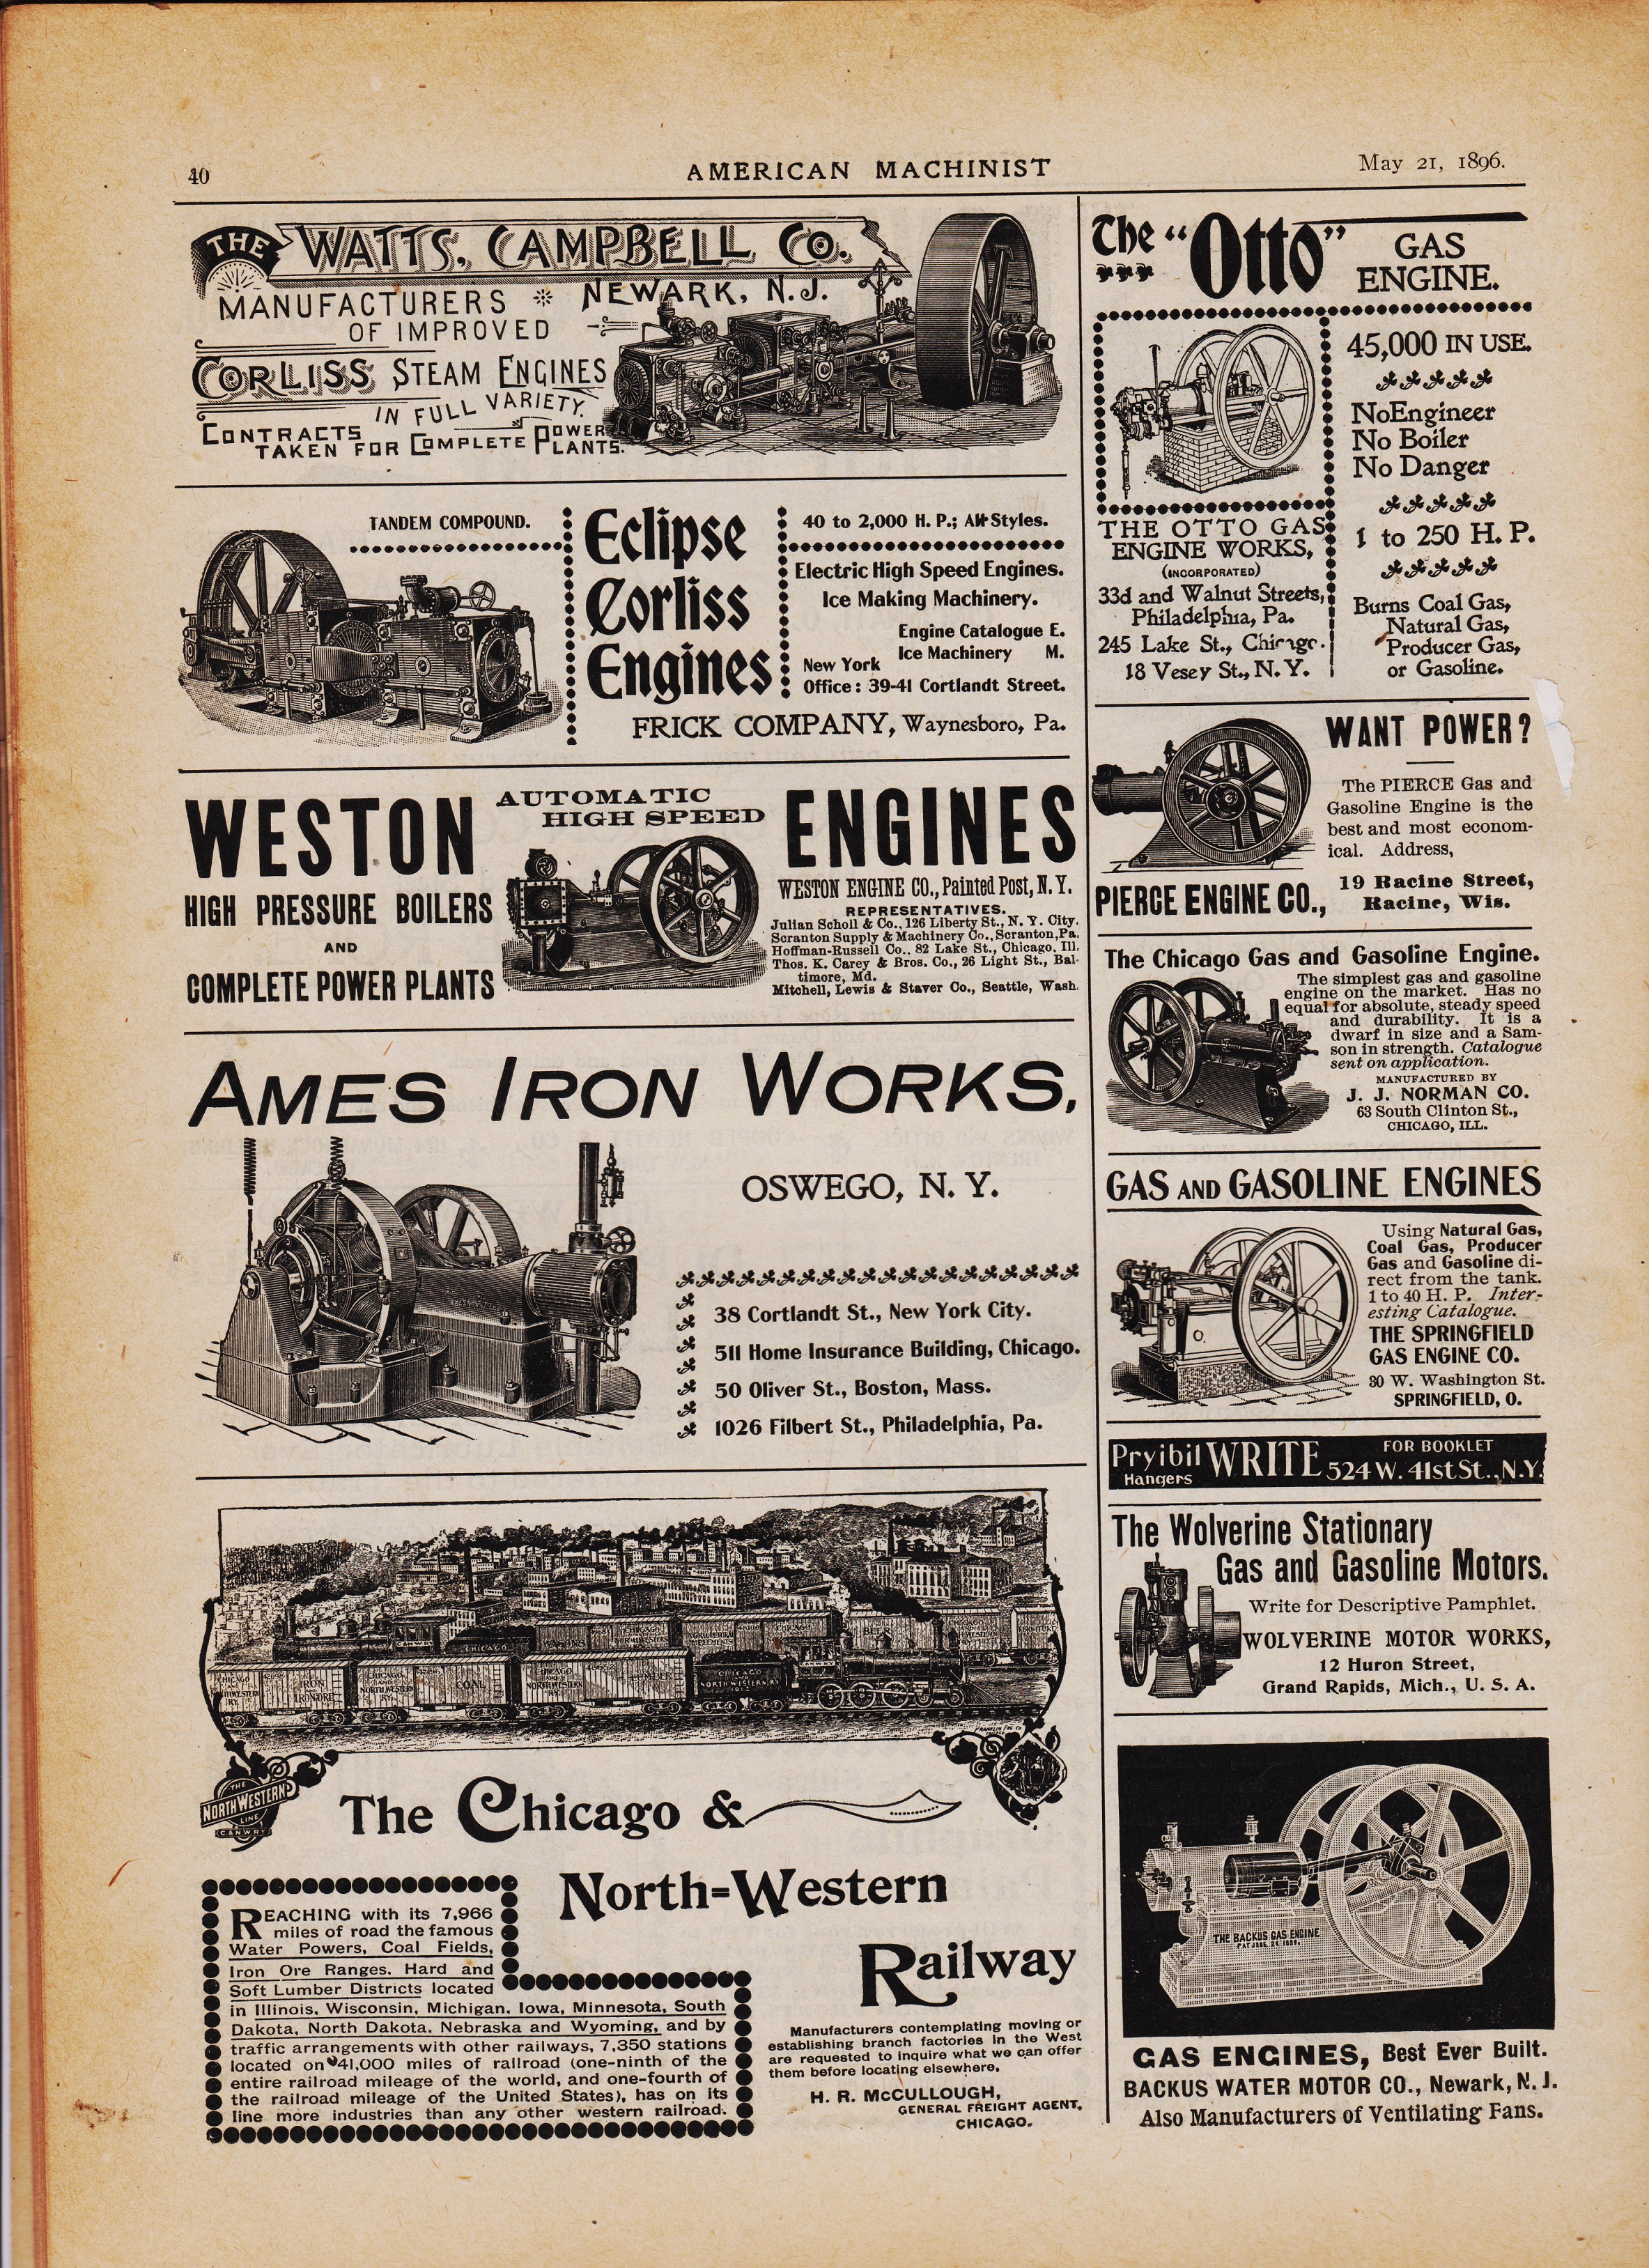 https://antiquemachinery.com/images-1896/American-Machinist-Feb-12-1887-May-1-pg-40-Gas-Engines-Bacus-Springfield-Pierce-want-power-Elipse-Watts-Campbell-Steam-engine-Weston-Otto-Gas-Engine-Works-50per.jpg 